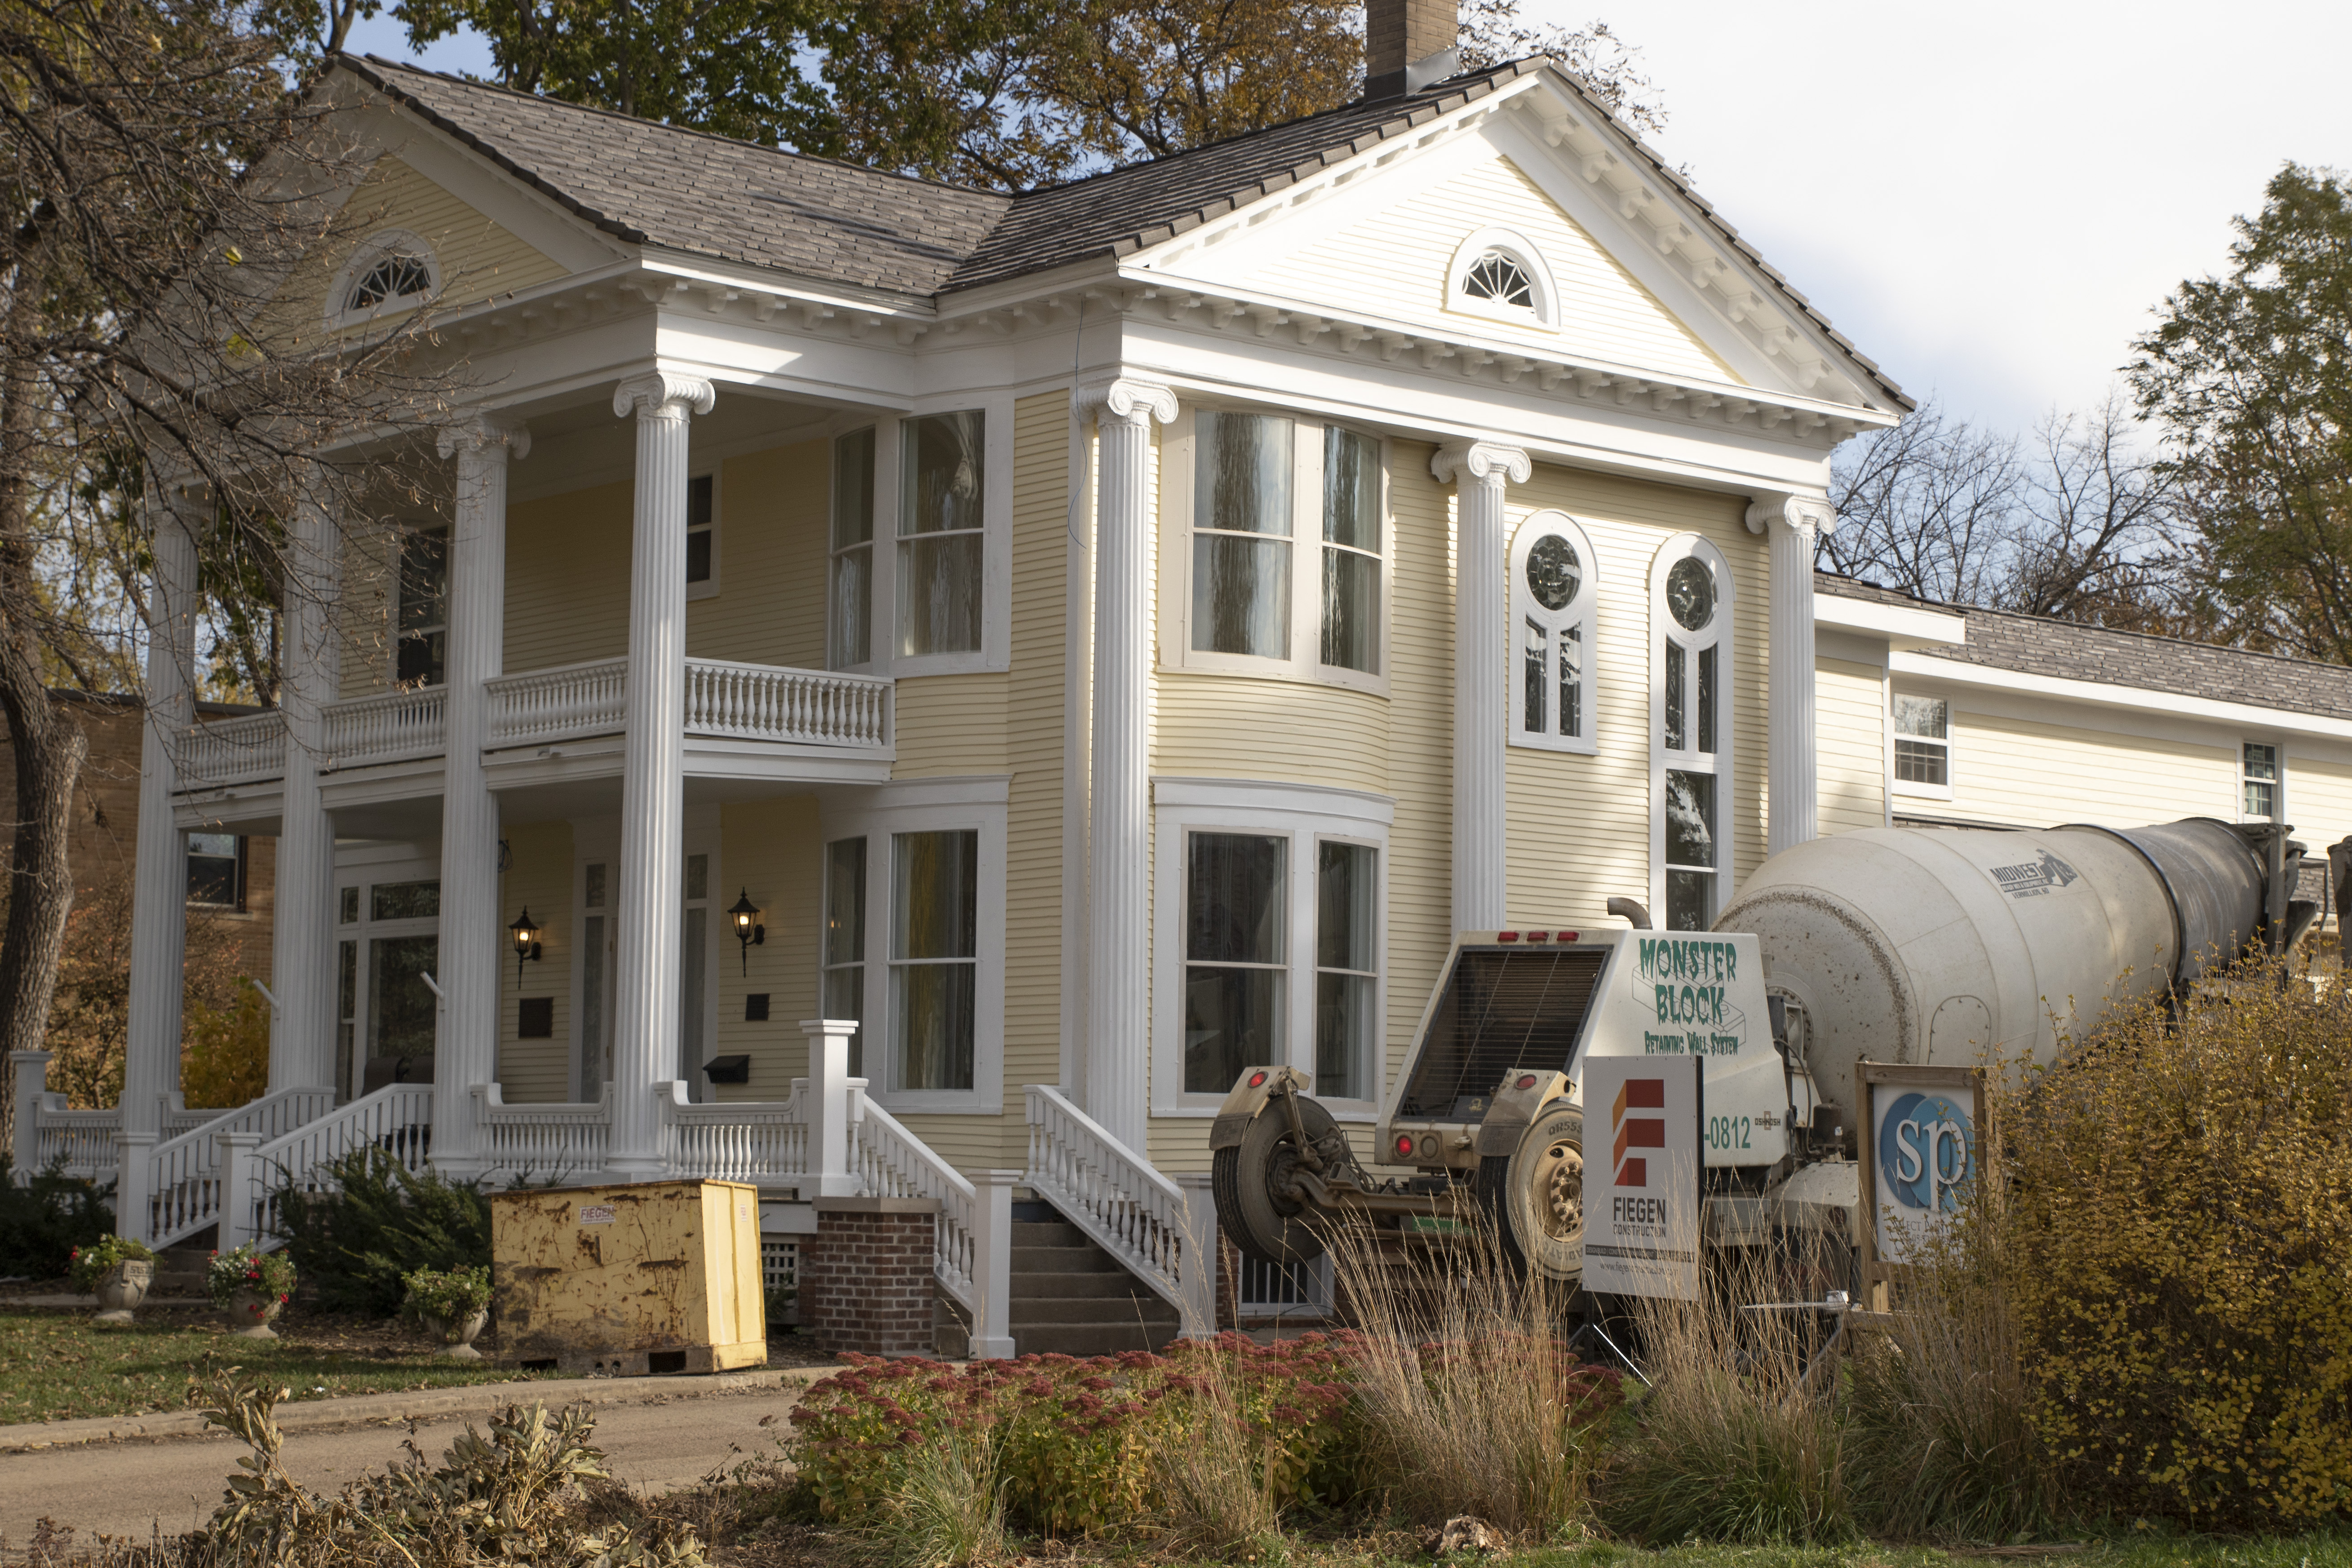 Inman House renovations almost completed, 403 E. Main Street purchased